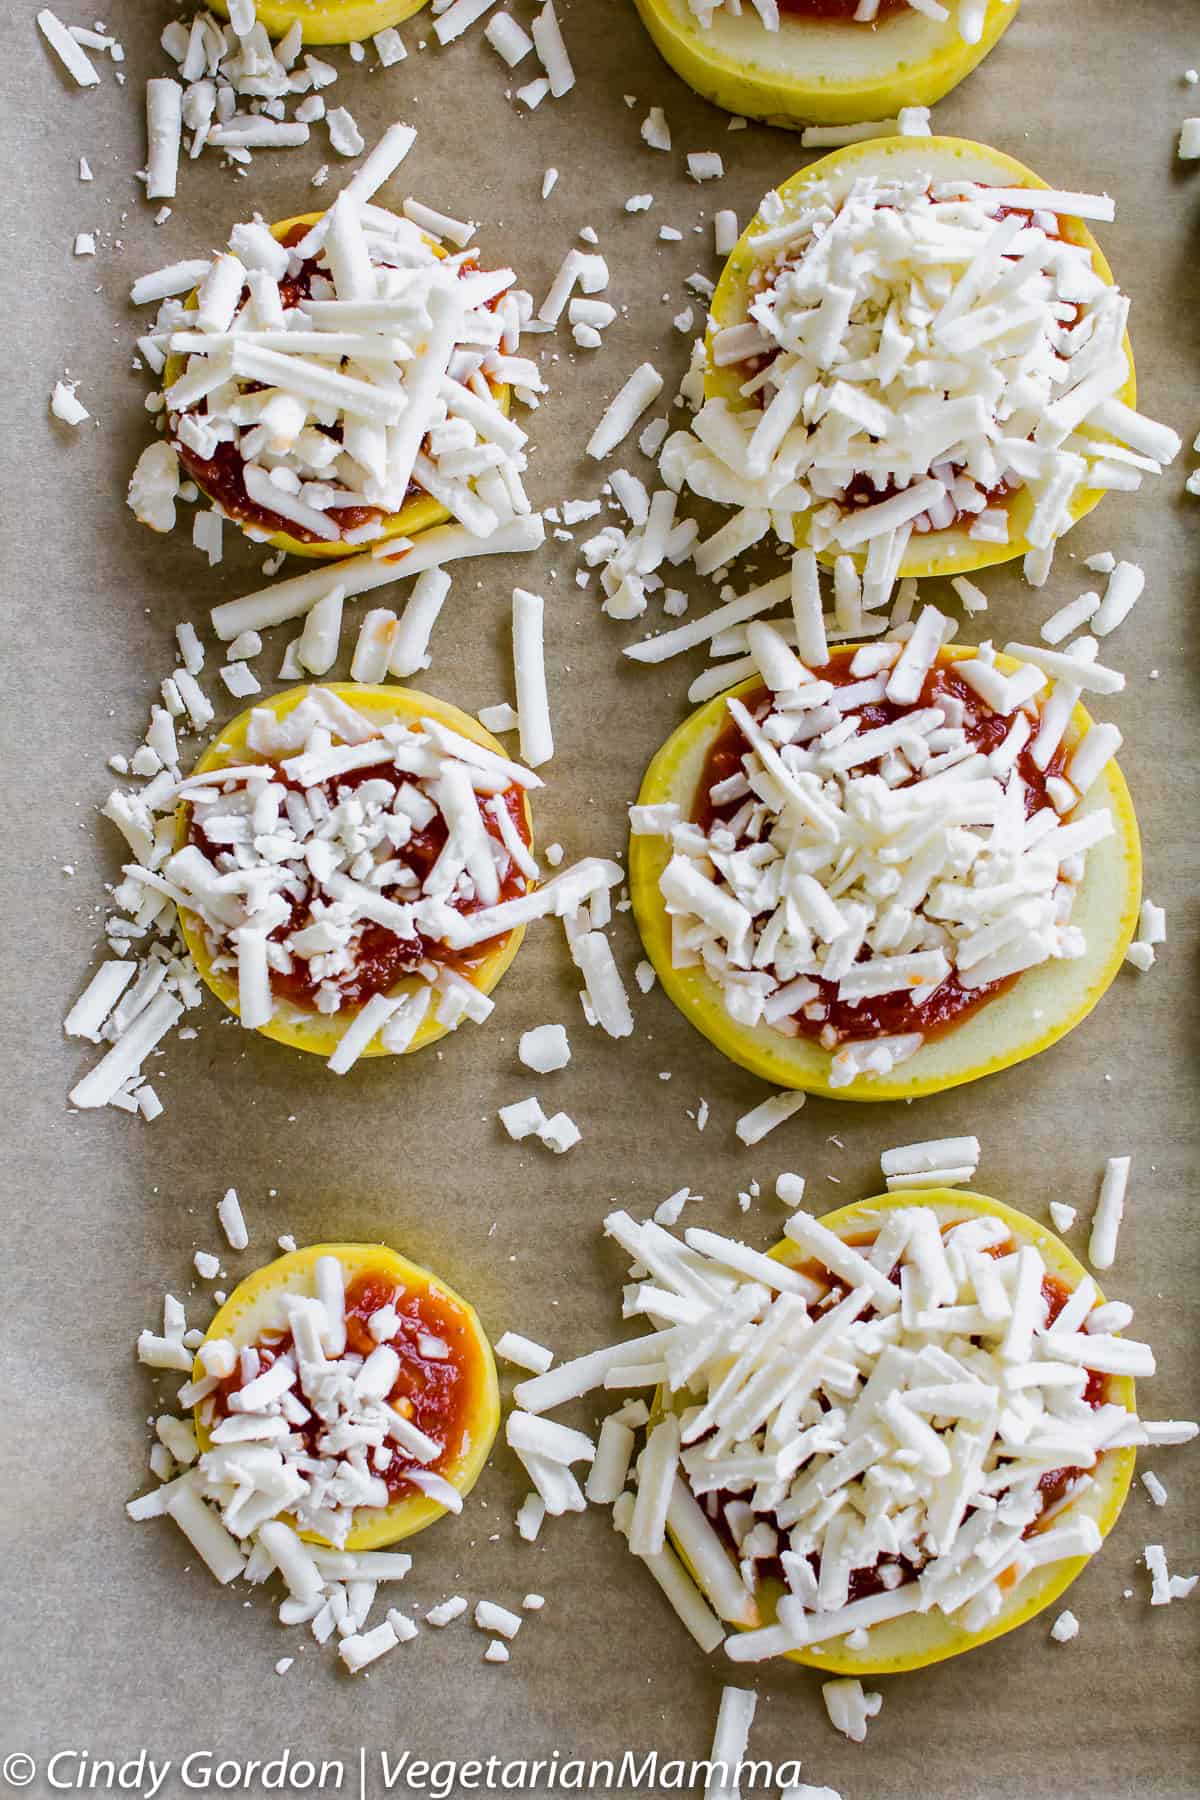 Looking for a fun and easy snack? These mini zucchini pizzas are easy to make and fun to customize!